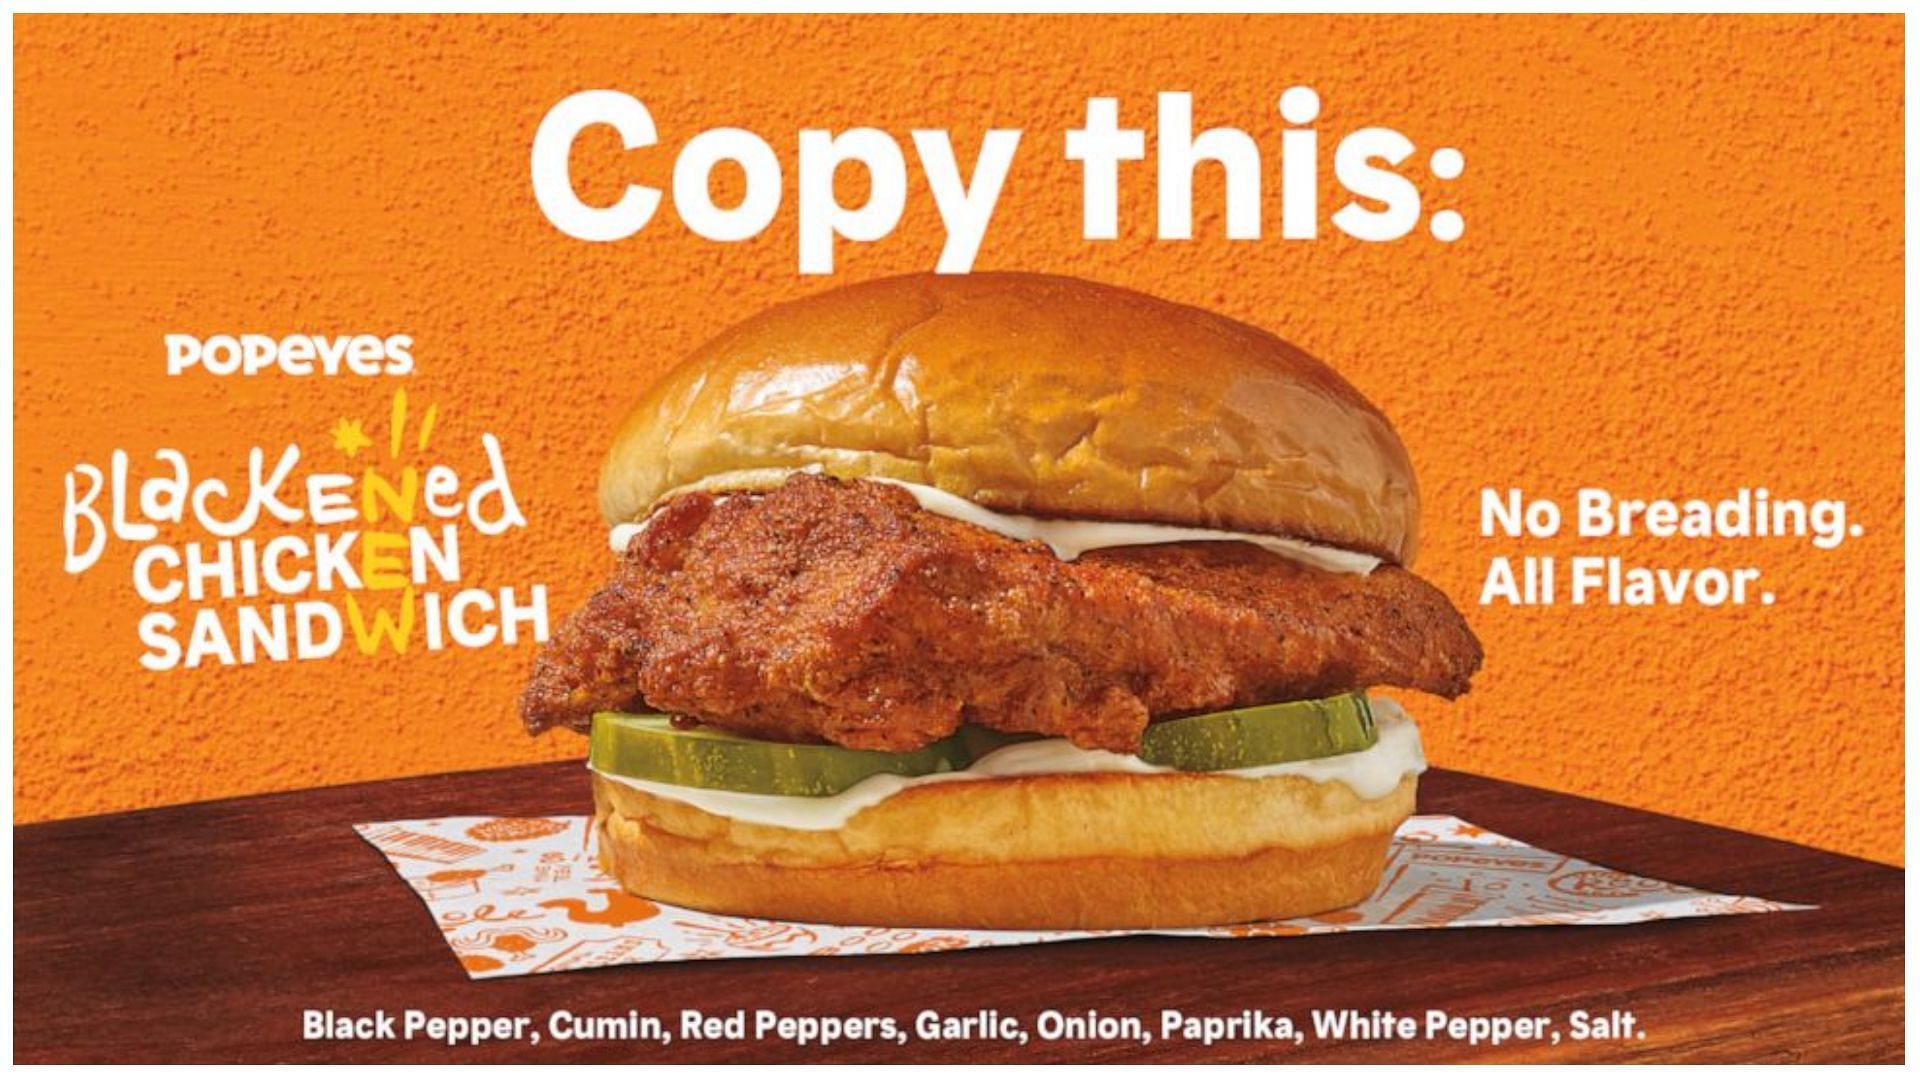 Why Is Popeyes Releasing The New Blackened Chicken Sandwich Details Revealed